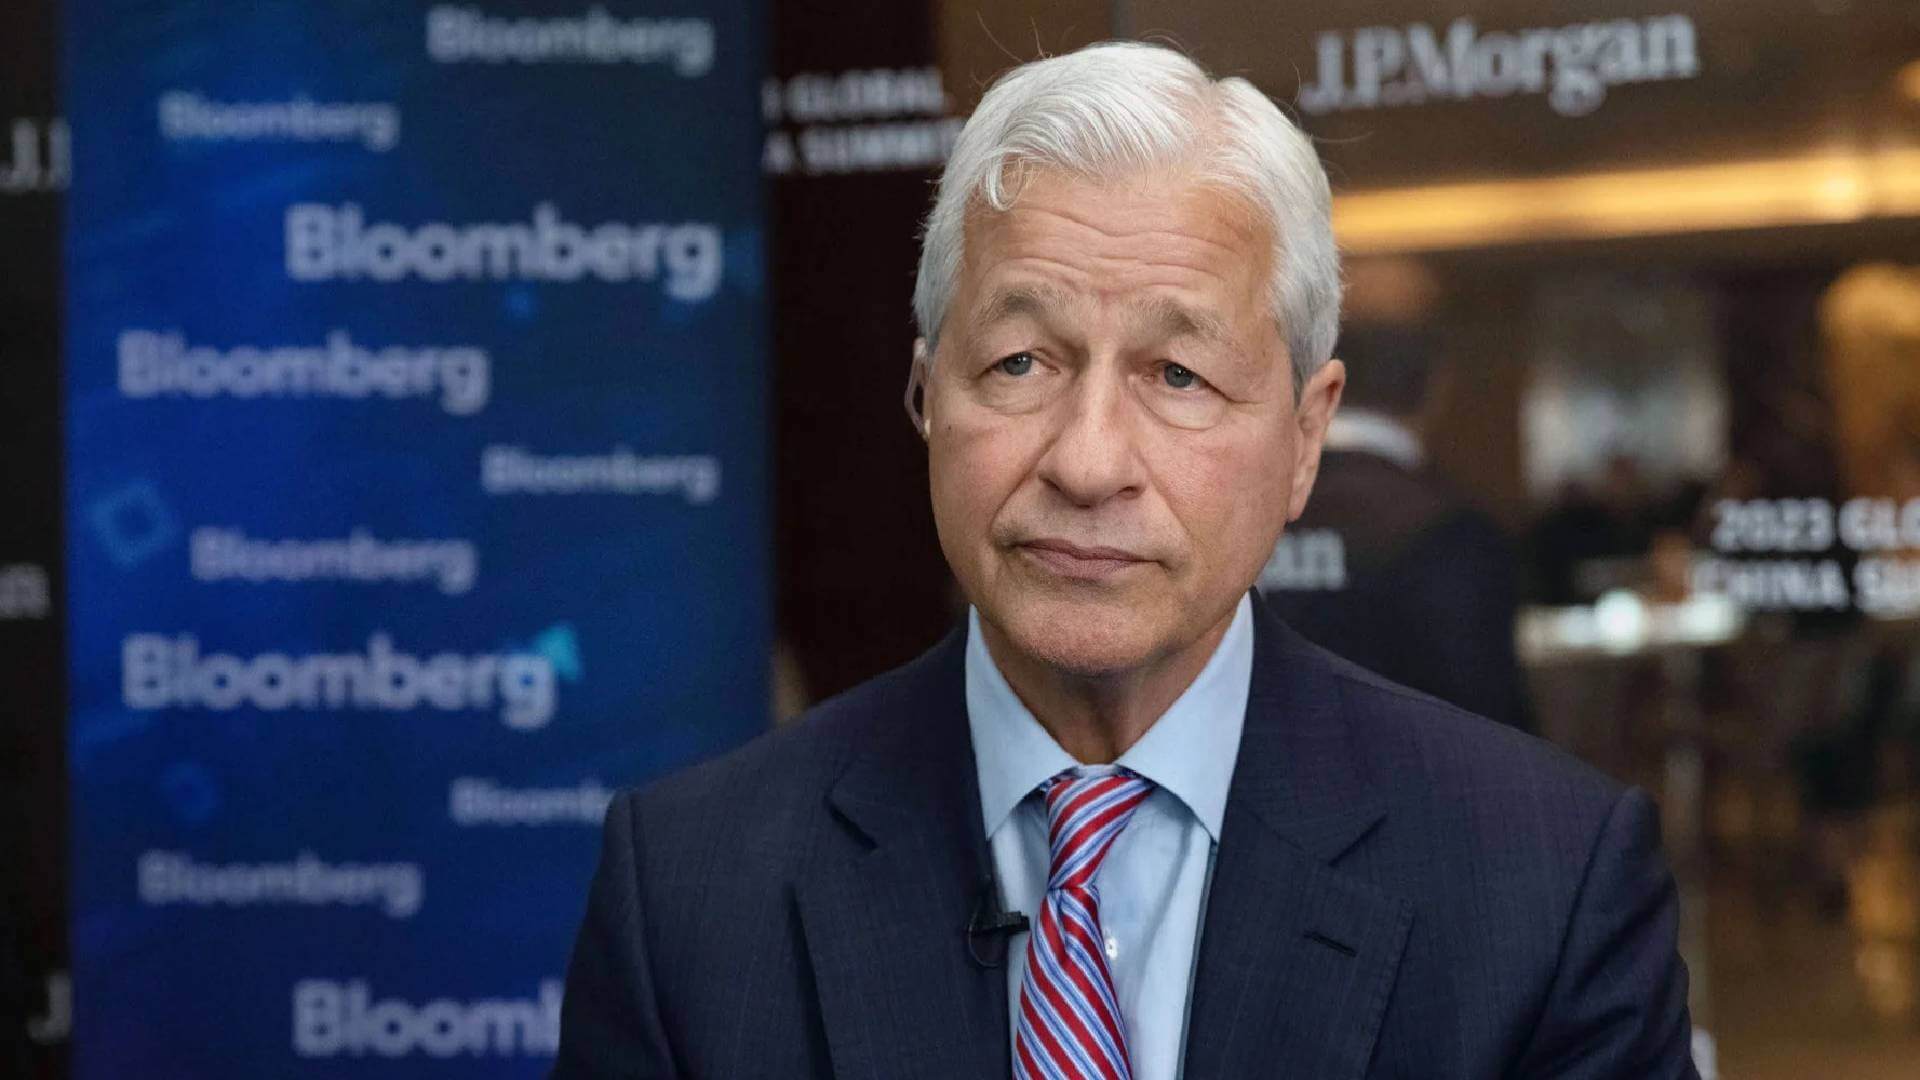 JP Morgan CEO, Jamie Dimon, To Sell Shares Of His Own Company